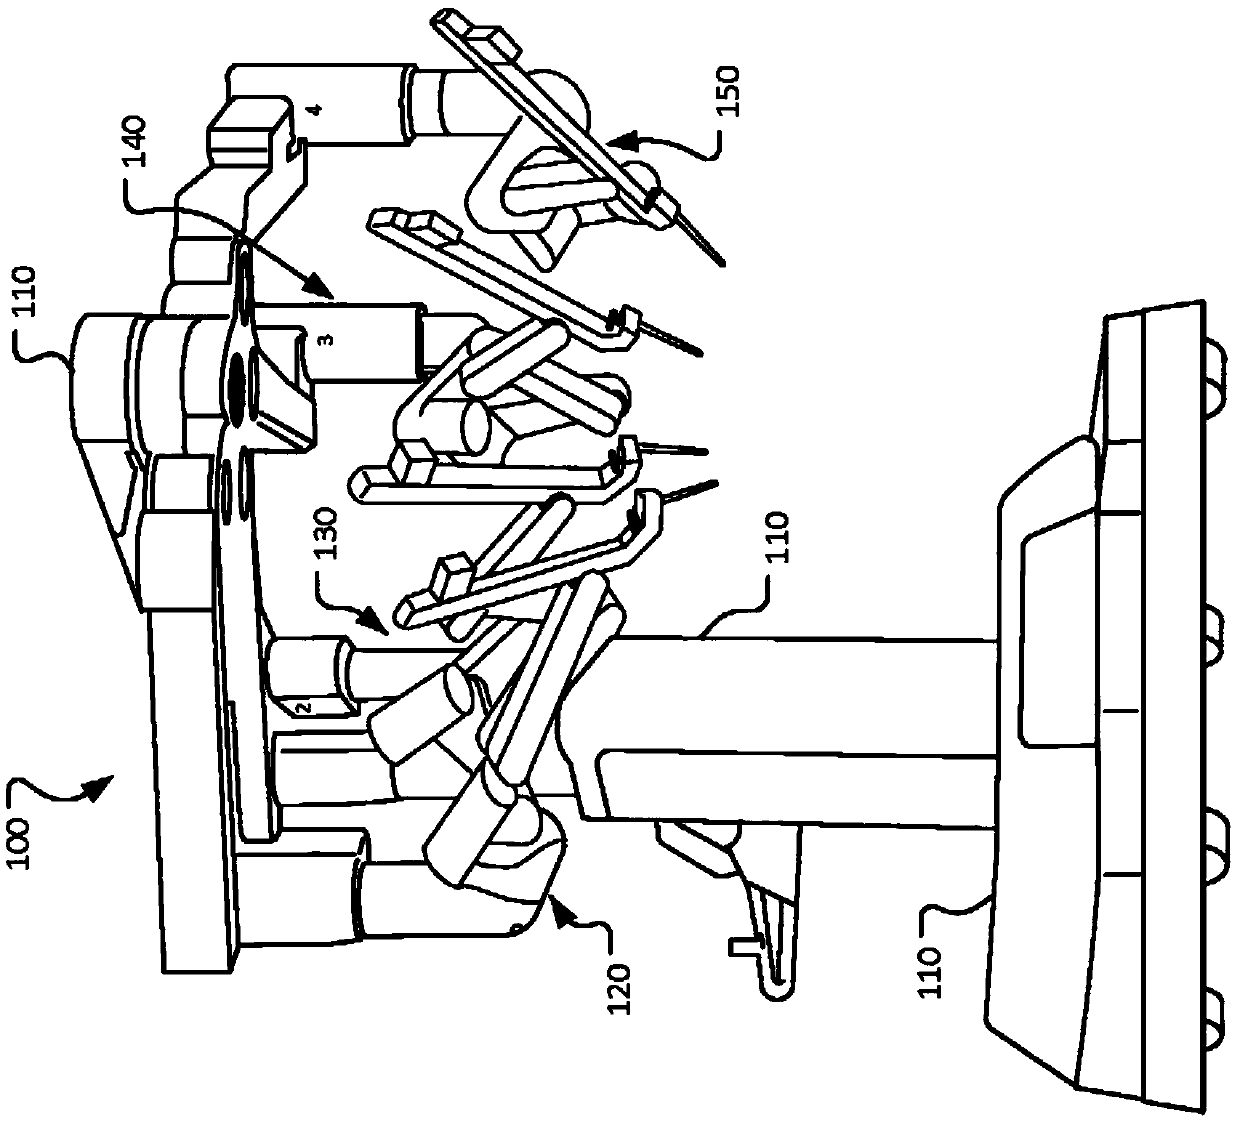 Computer-assisted tele-operated surgery systems and methods